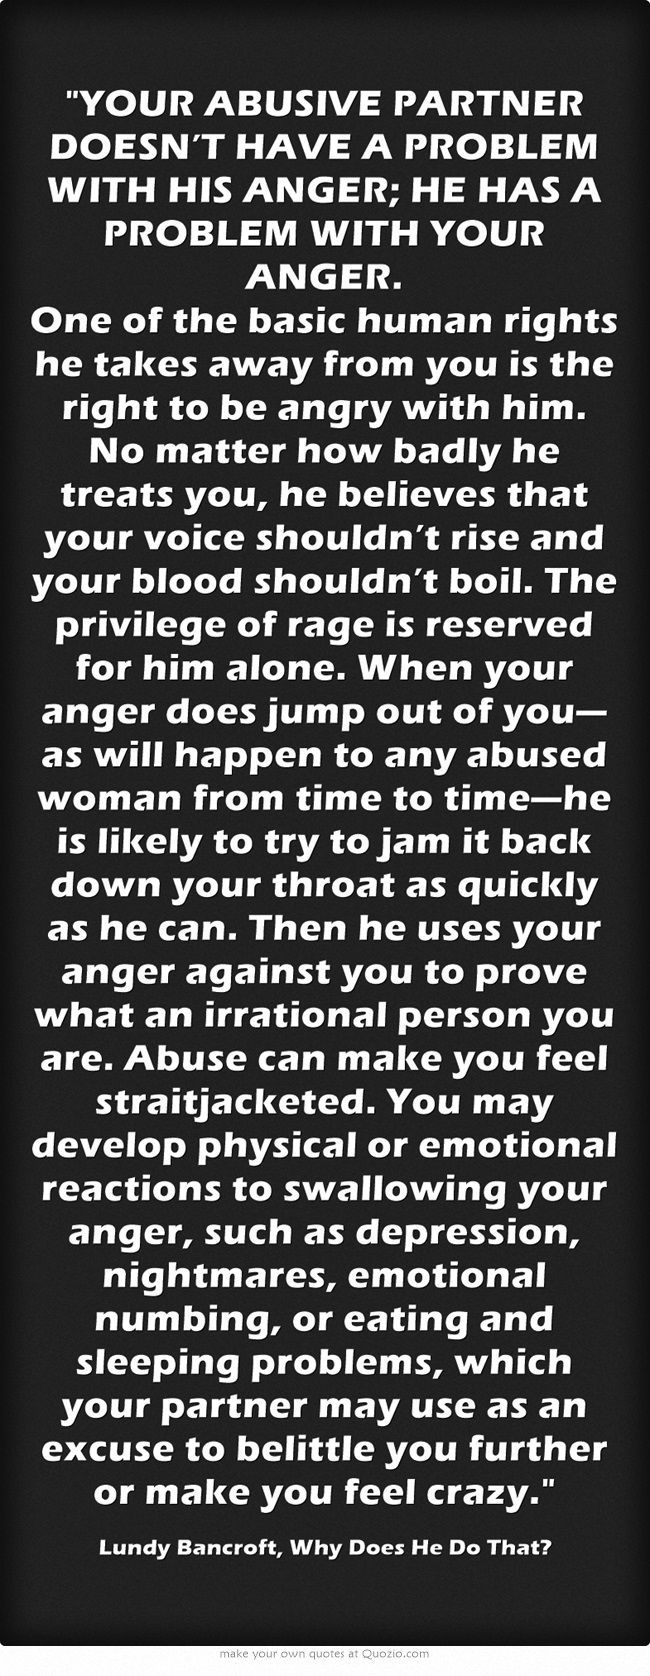 YOUR ABUSIVE PARTNER DOESN’T HAVE A PROBLEM WITH HIS ANGER; HE HAS A PROBLEM WITH YOUR ANGER. One of the basic human rights he